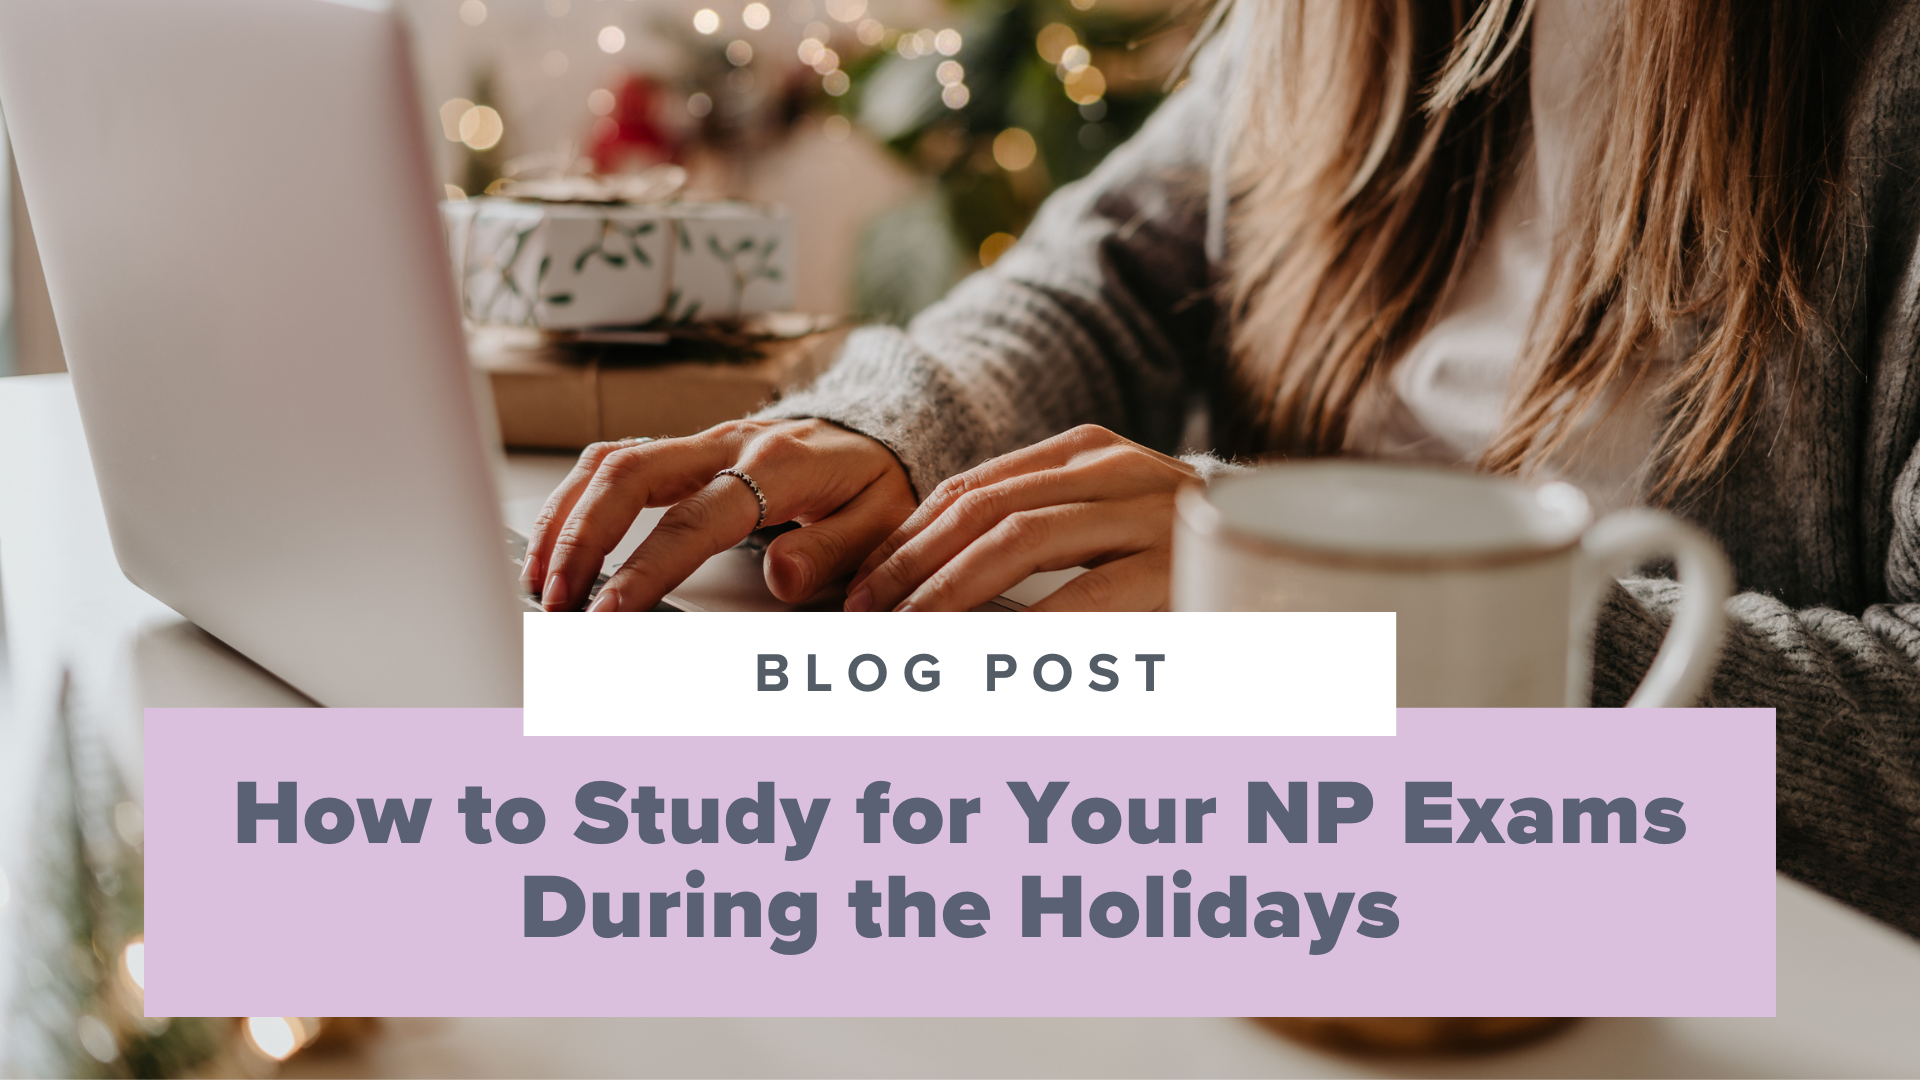 SMNP Blog - How to Study for Your NP Exams During the Holidays